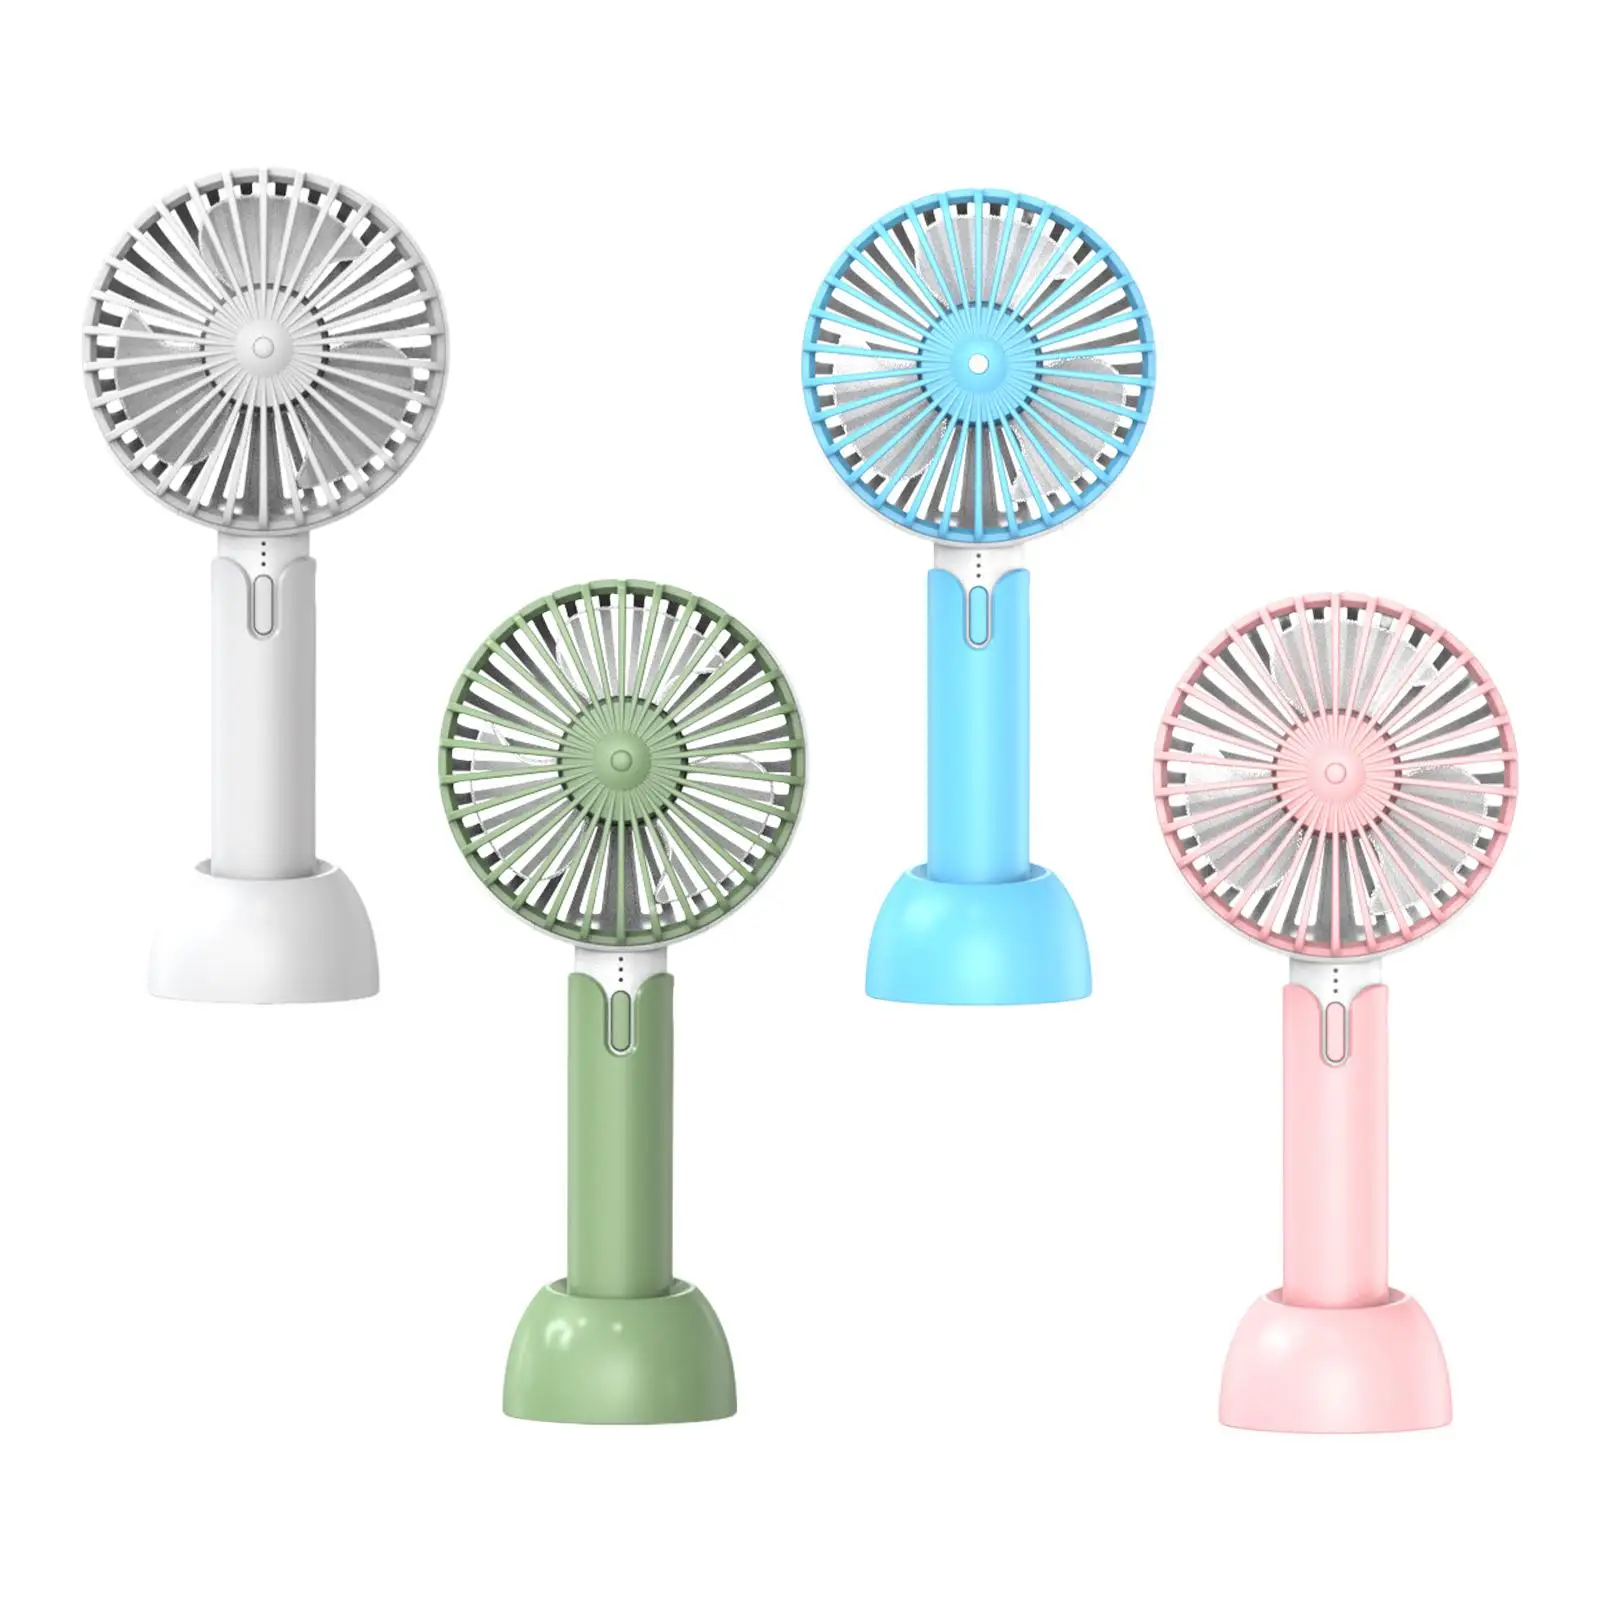 Handheld Fan Powerful USB Rechargeable Quiet Operation Air Cooling Fan for Indoor Outdoor Beach Backpacking Travel Camping